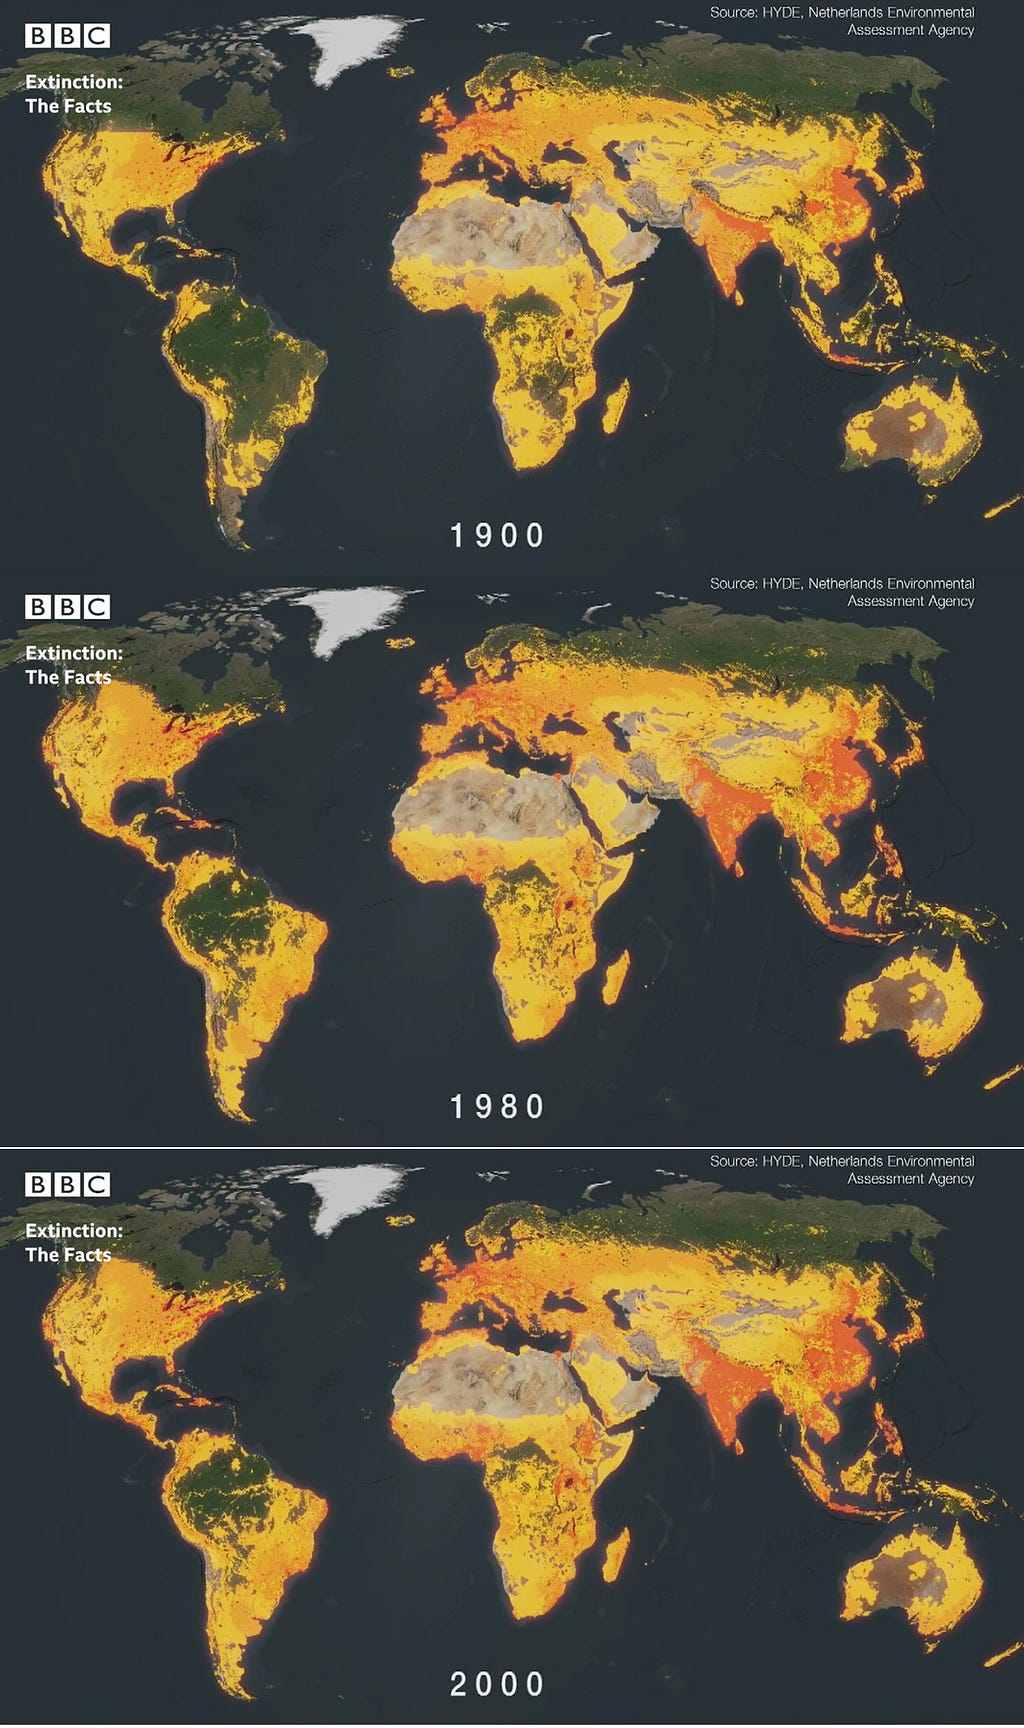 Land-use conversion evolution from 1900 to 2000. Yellow and orange, human usage. Source: HYDE, Netherlands Environmental Assesment Agency / BBC